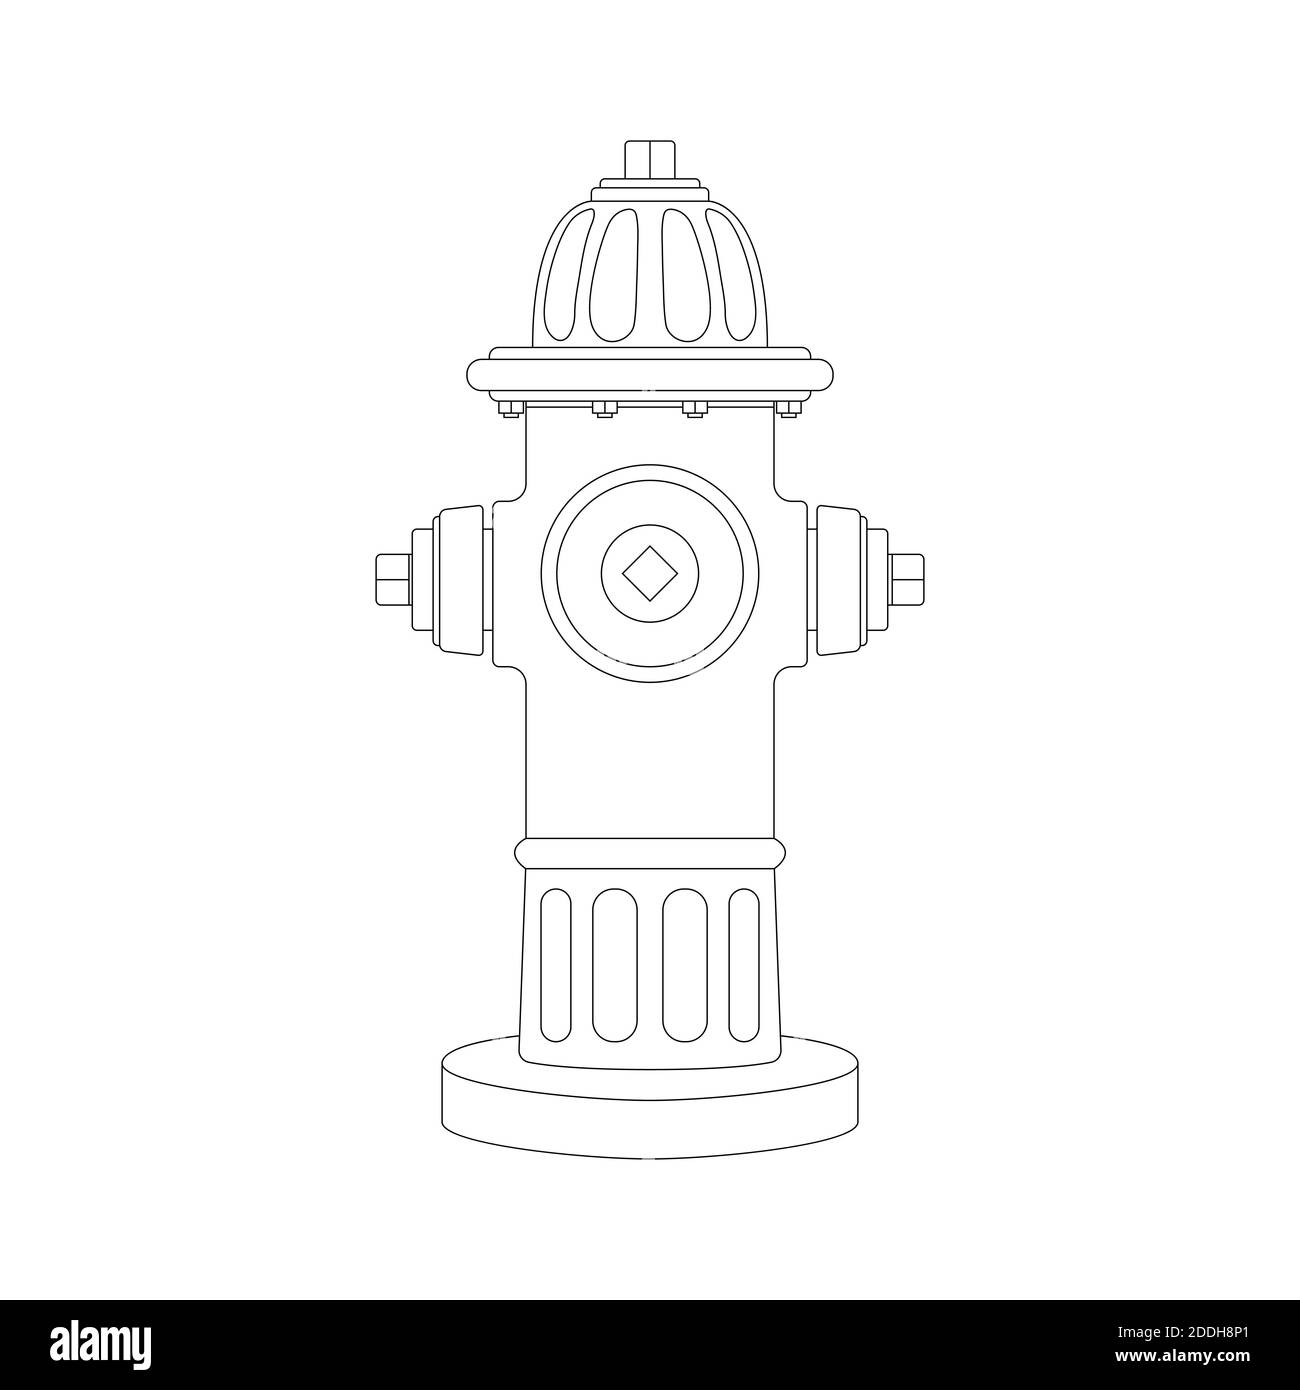 fire hydrant vector